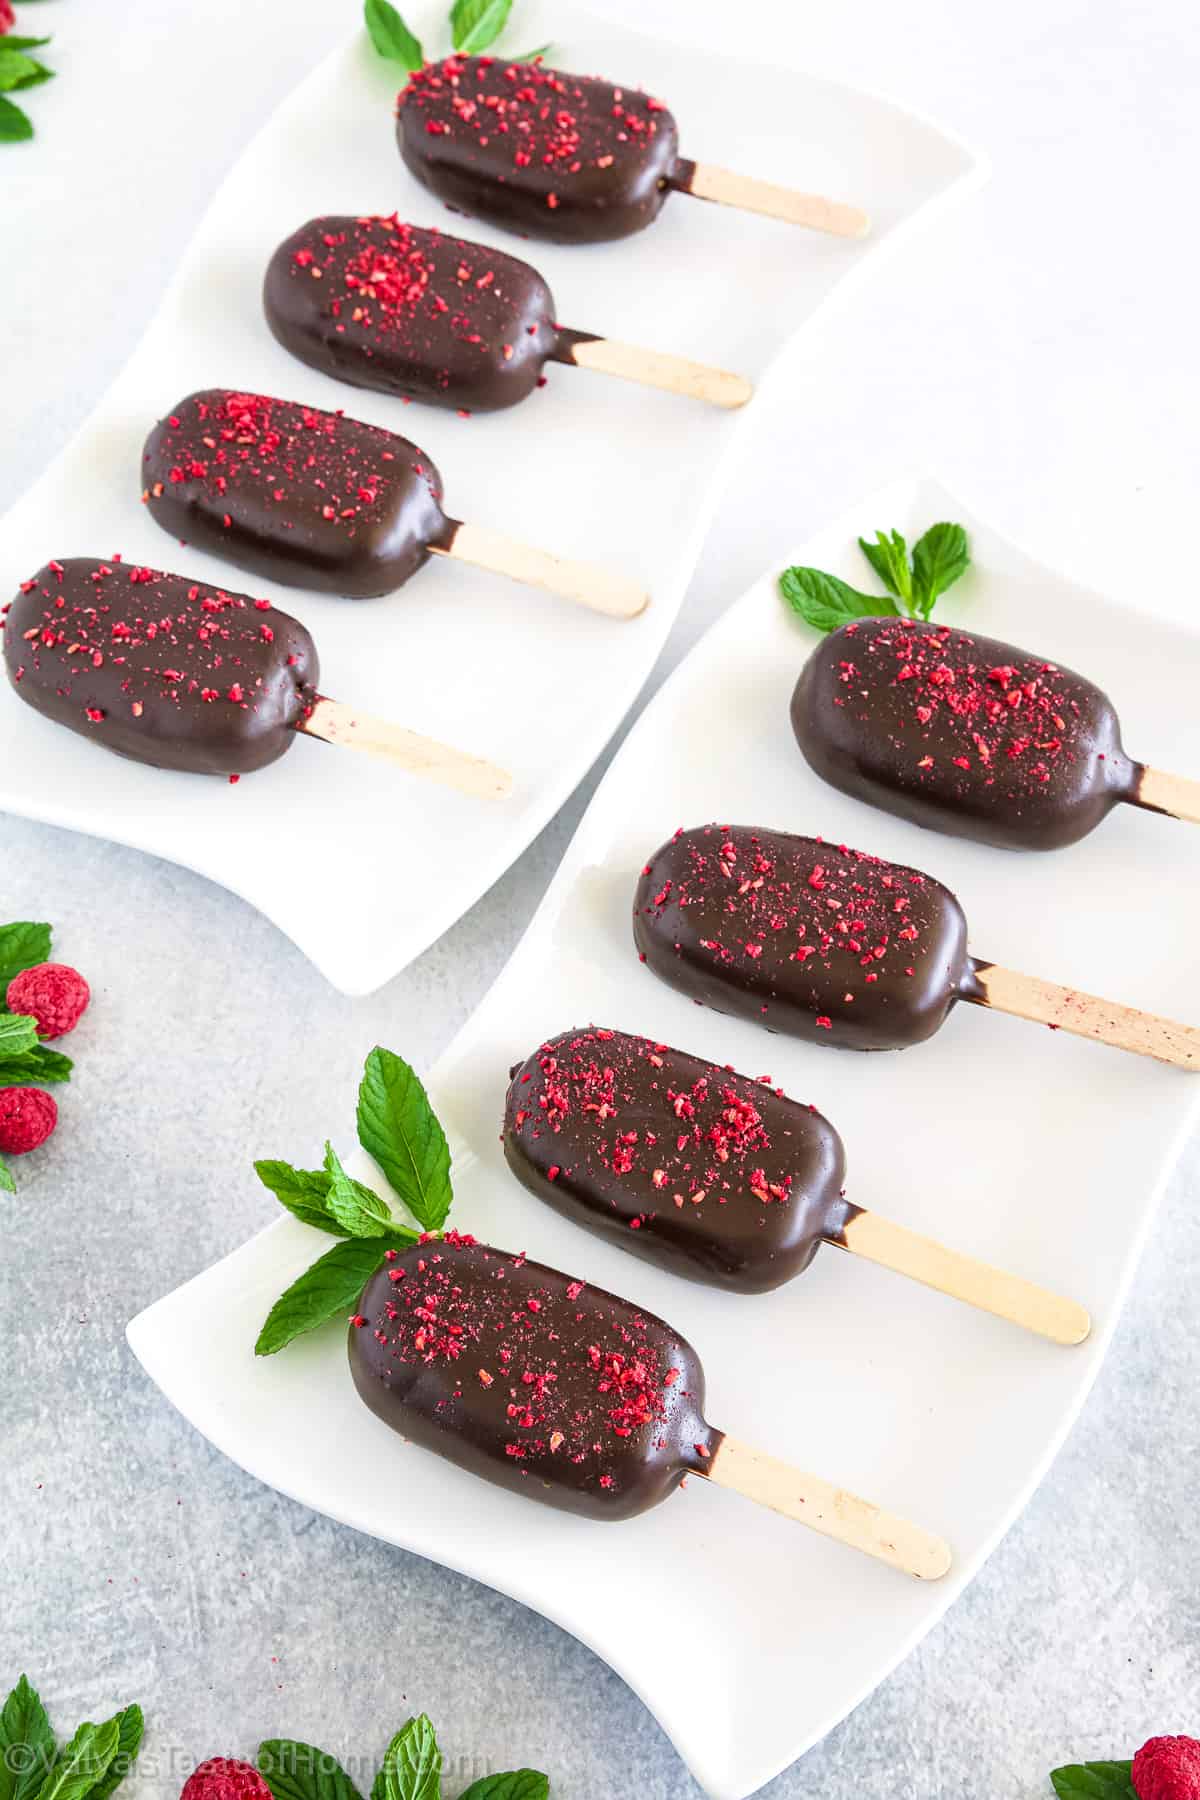 Cakesicles can be embellished with different toppings and coatings, such as melted chocolate, candy melts, sprinkles, or edible glitter, after chilling or short freezing to firm them.